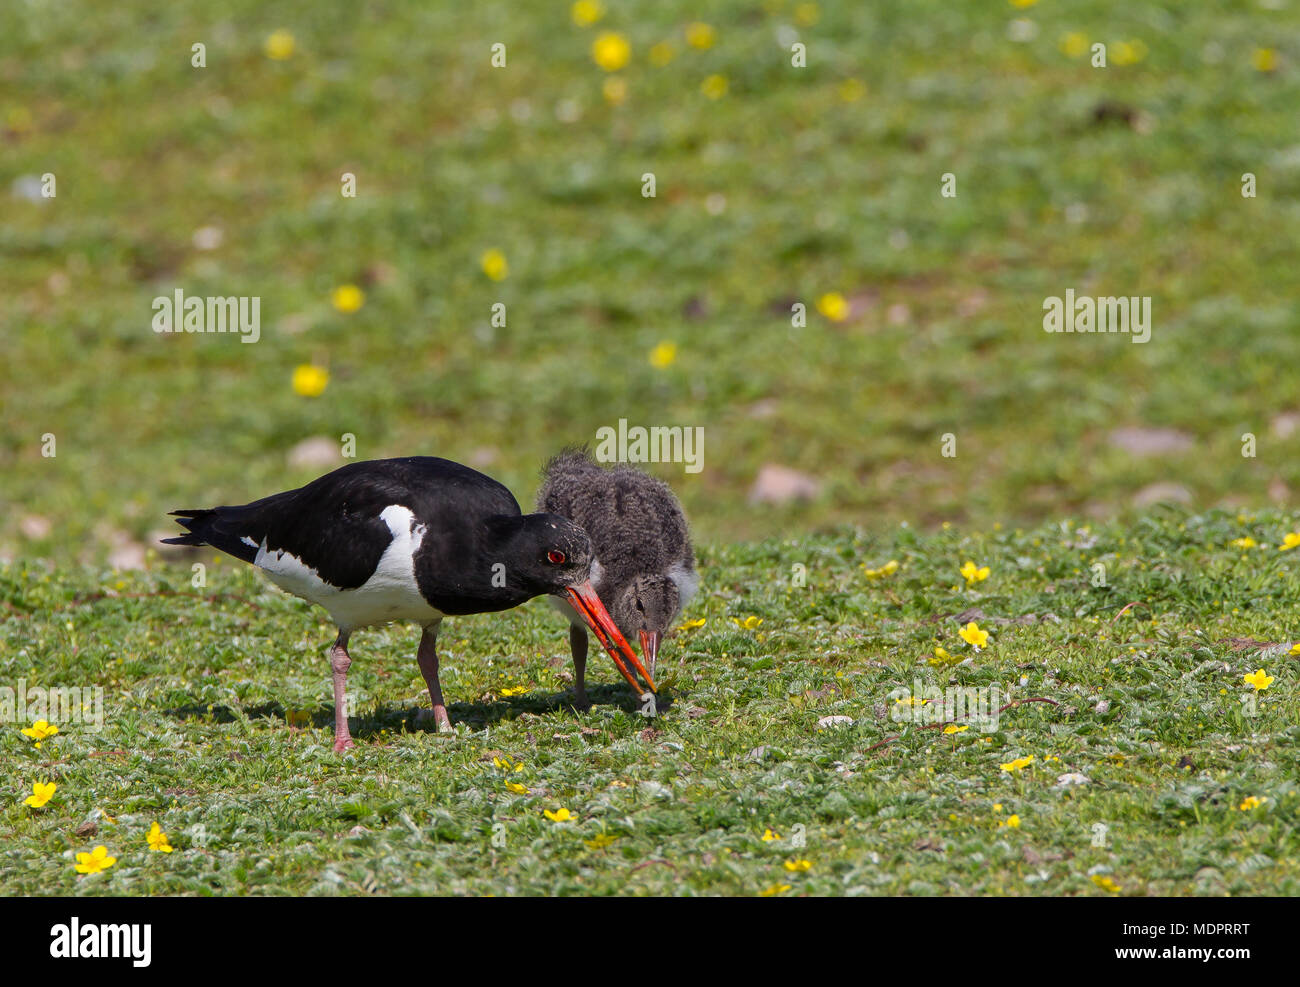 Close up of adult oystercatcher (Haematopus ostralegus) with single chick, fluffy & downy, together on grass, probing for earthworms with long bills. Stock Photo